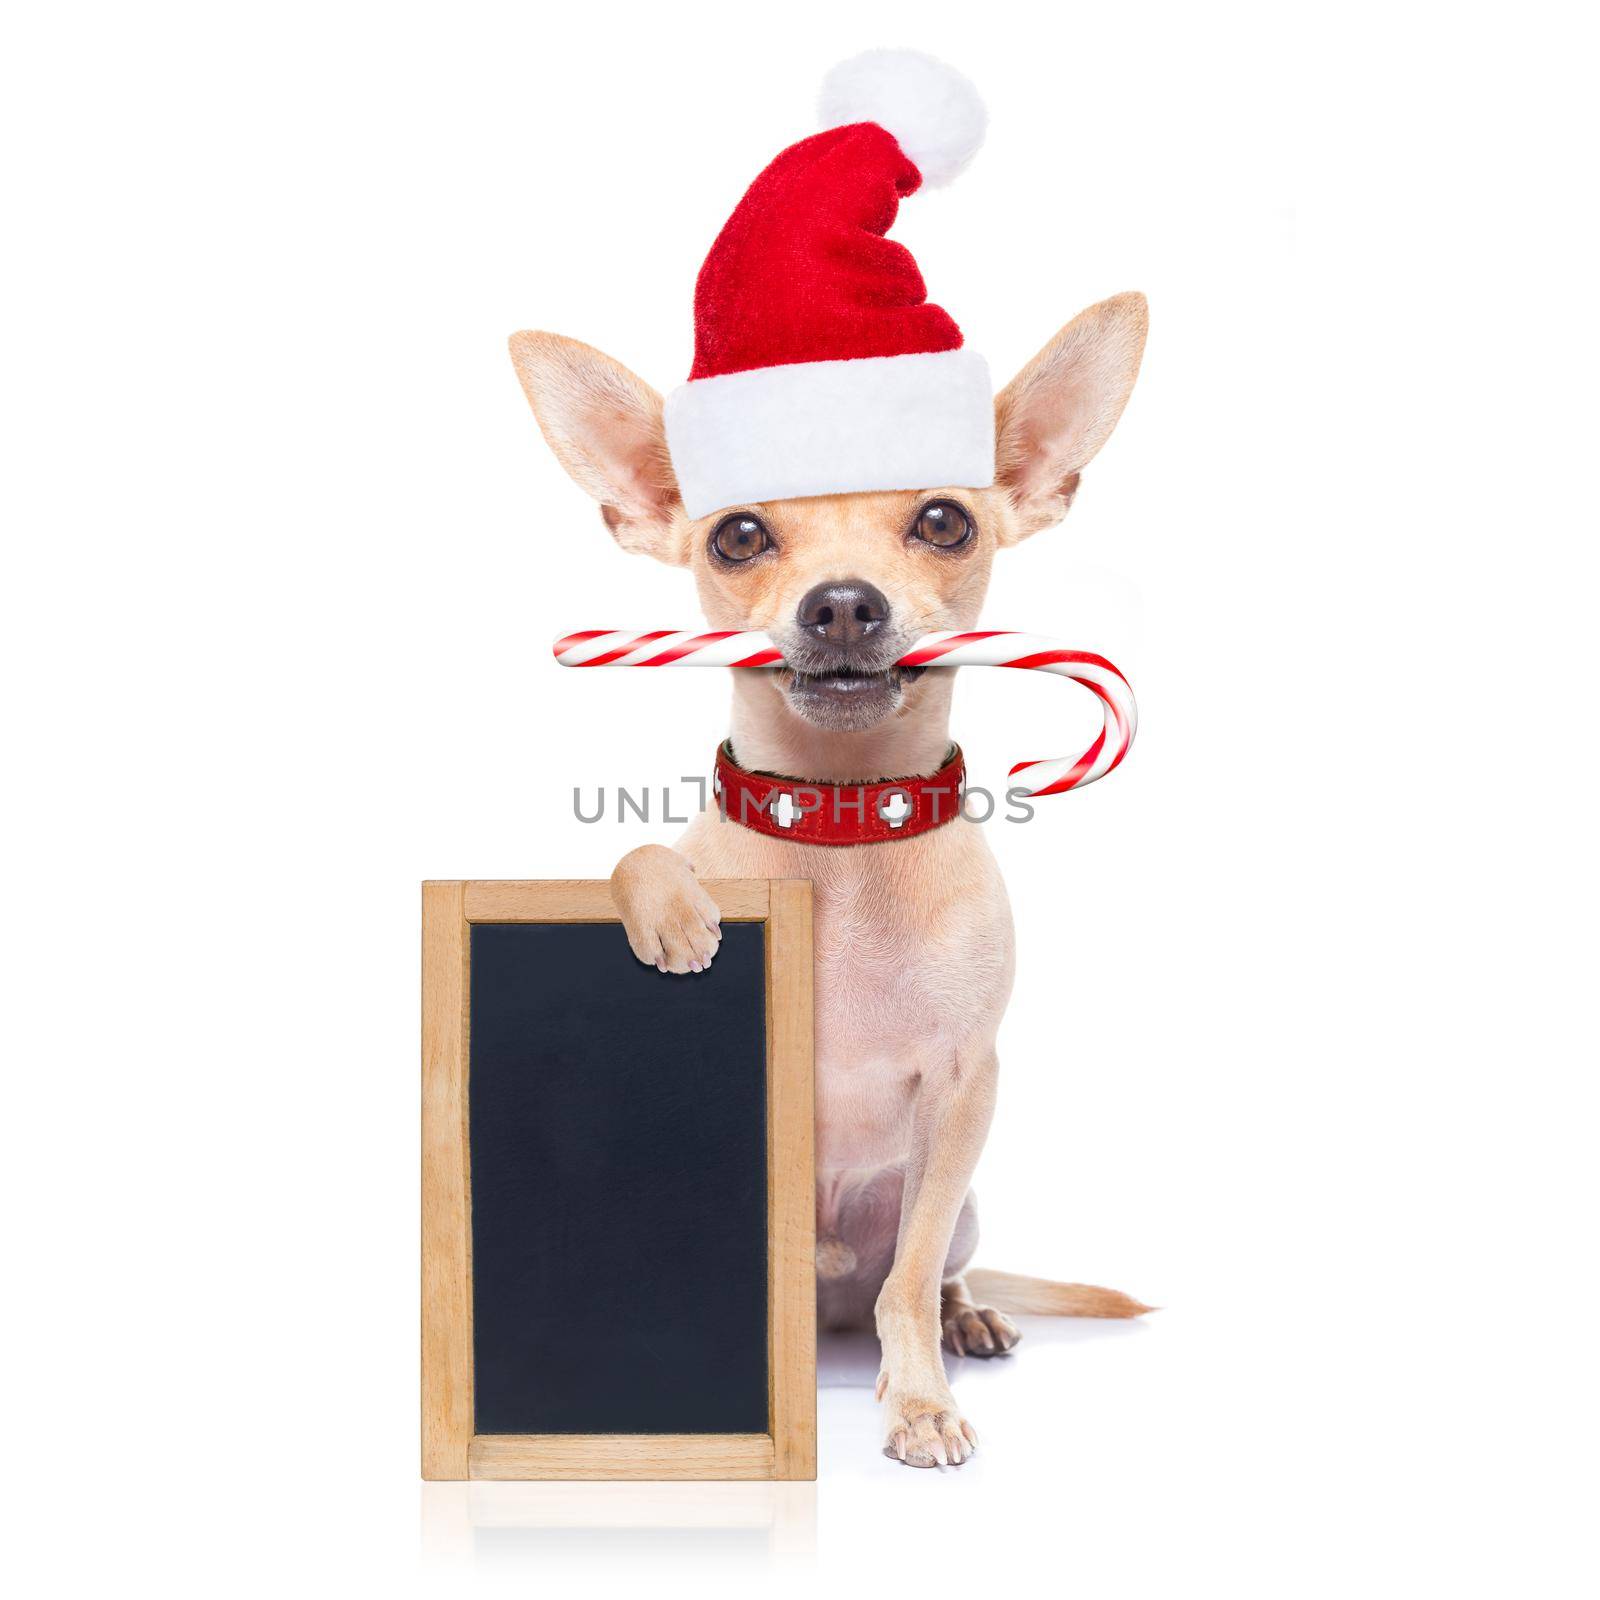 chihuahua santa claus dog behind a blank empty placard or blackboard, for christmas , isolated on white background